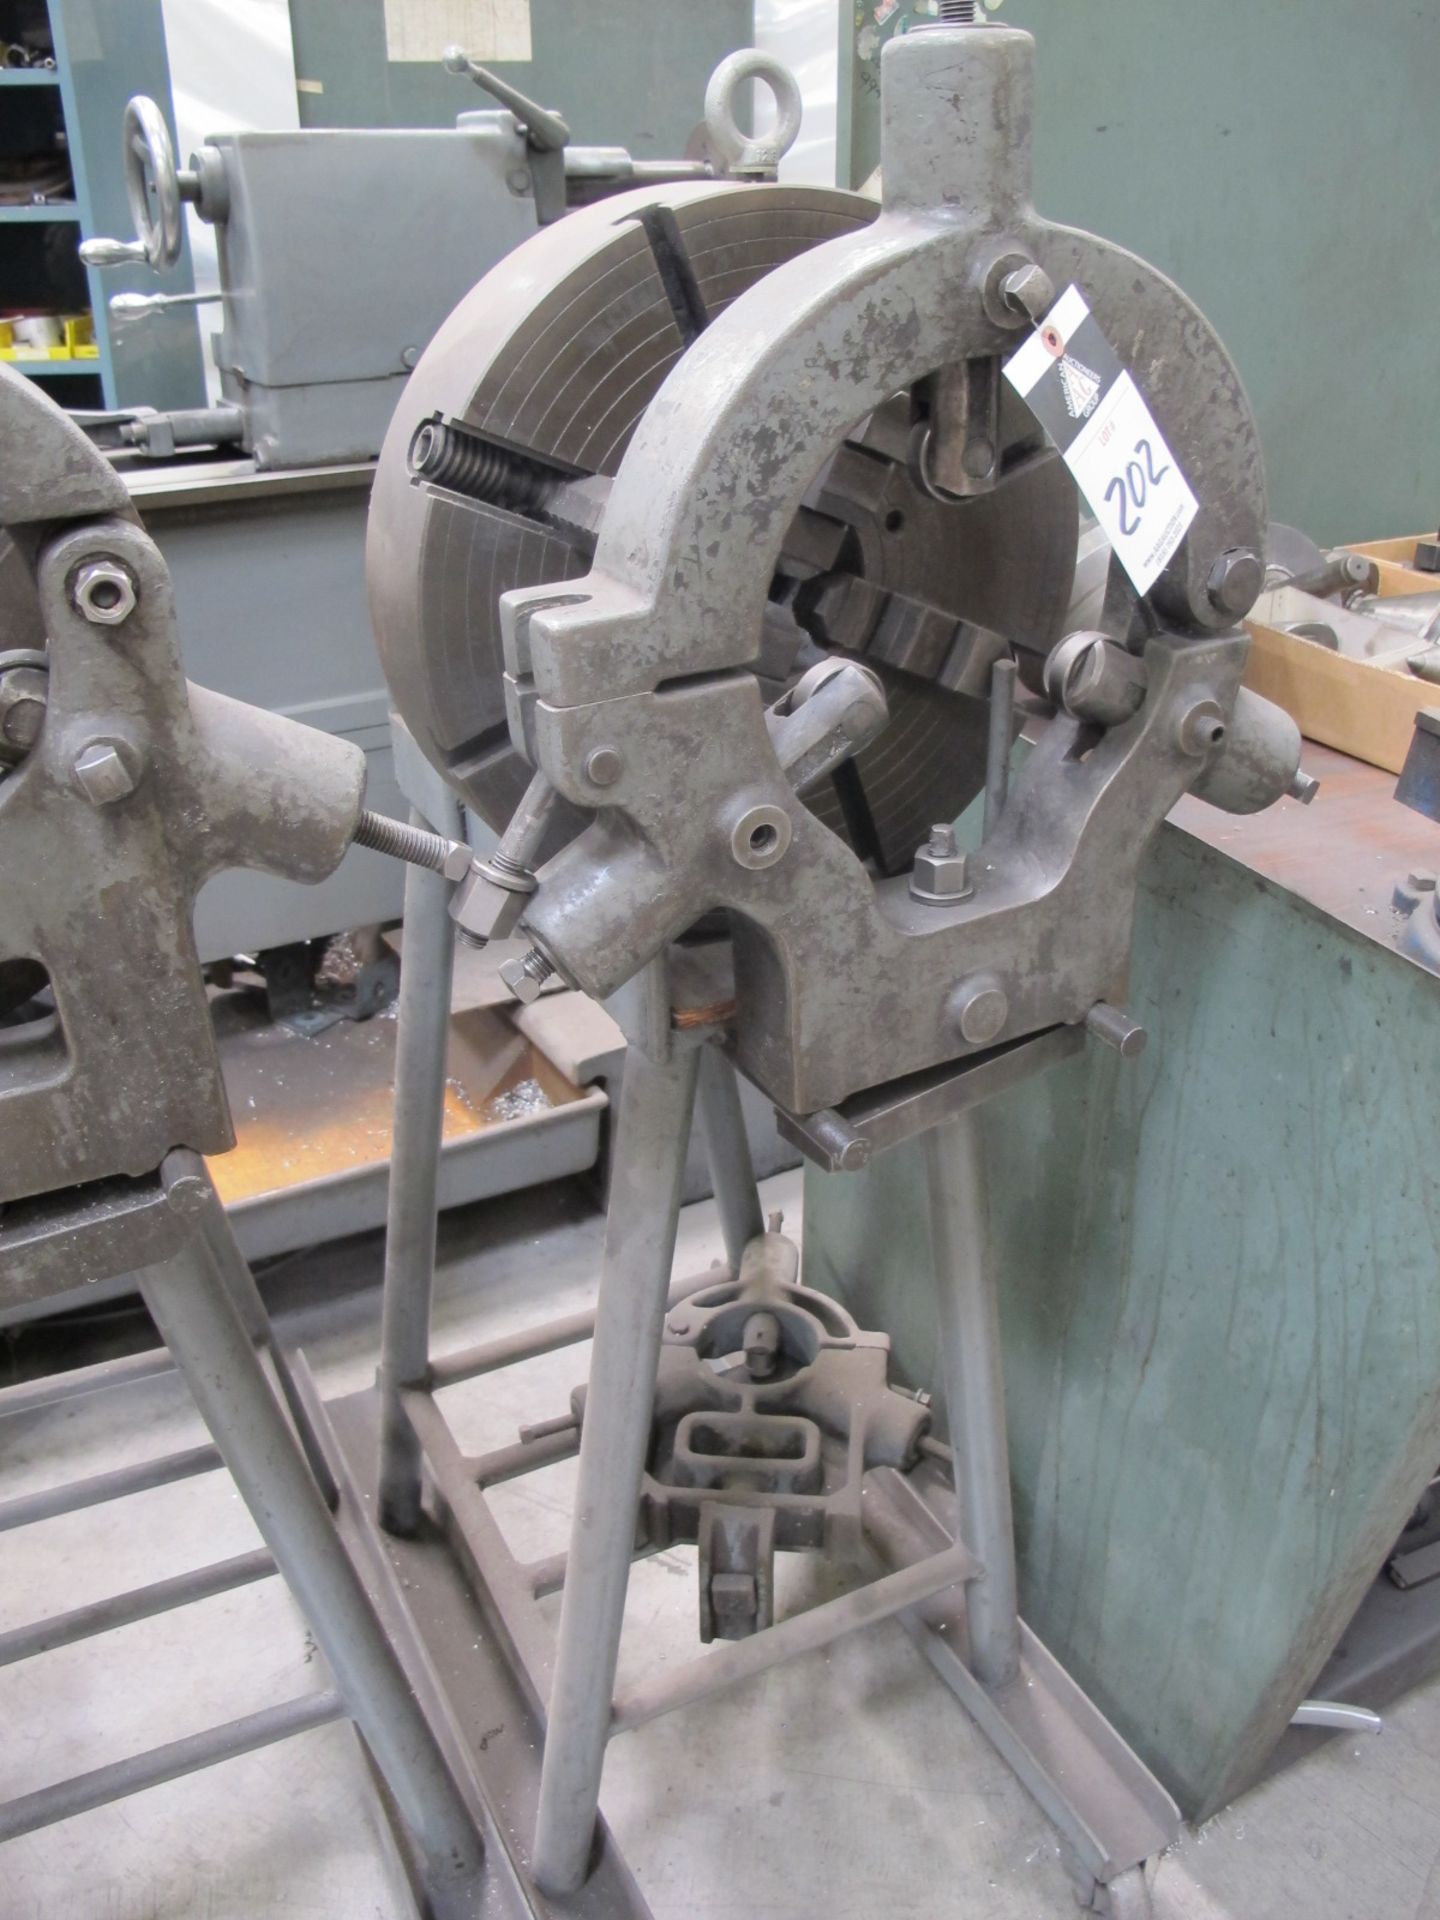 16" 4-Jaw Chuck, Steady Rest and Rolling Stand